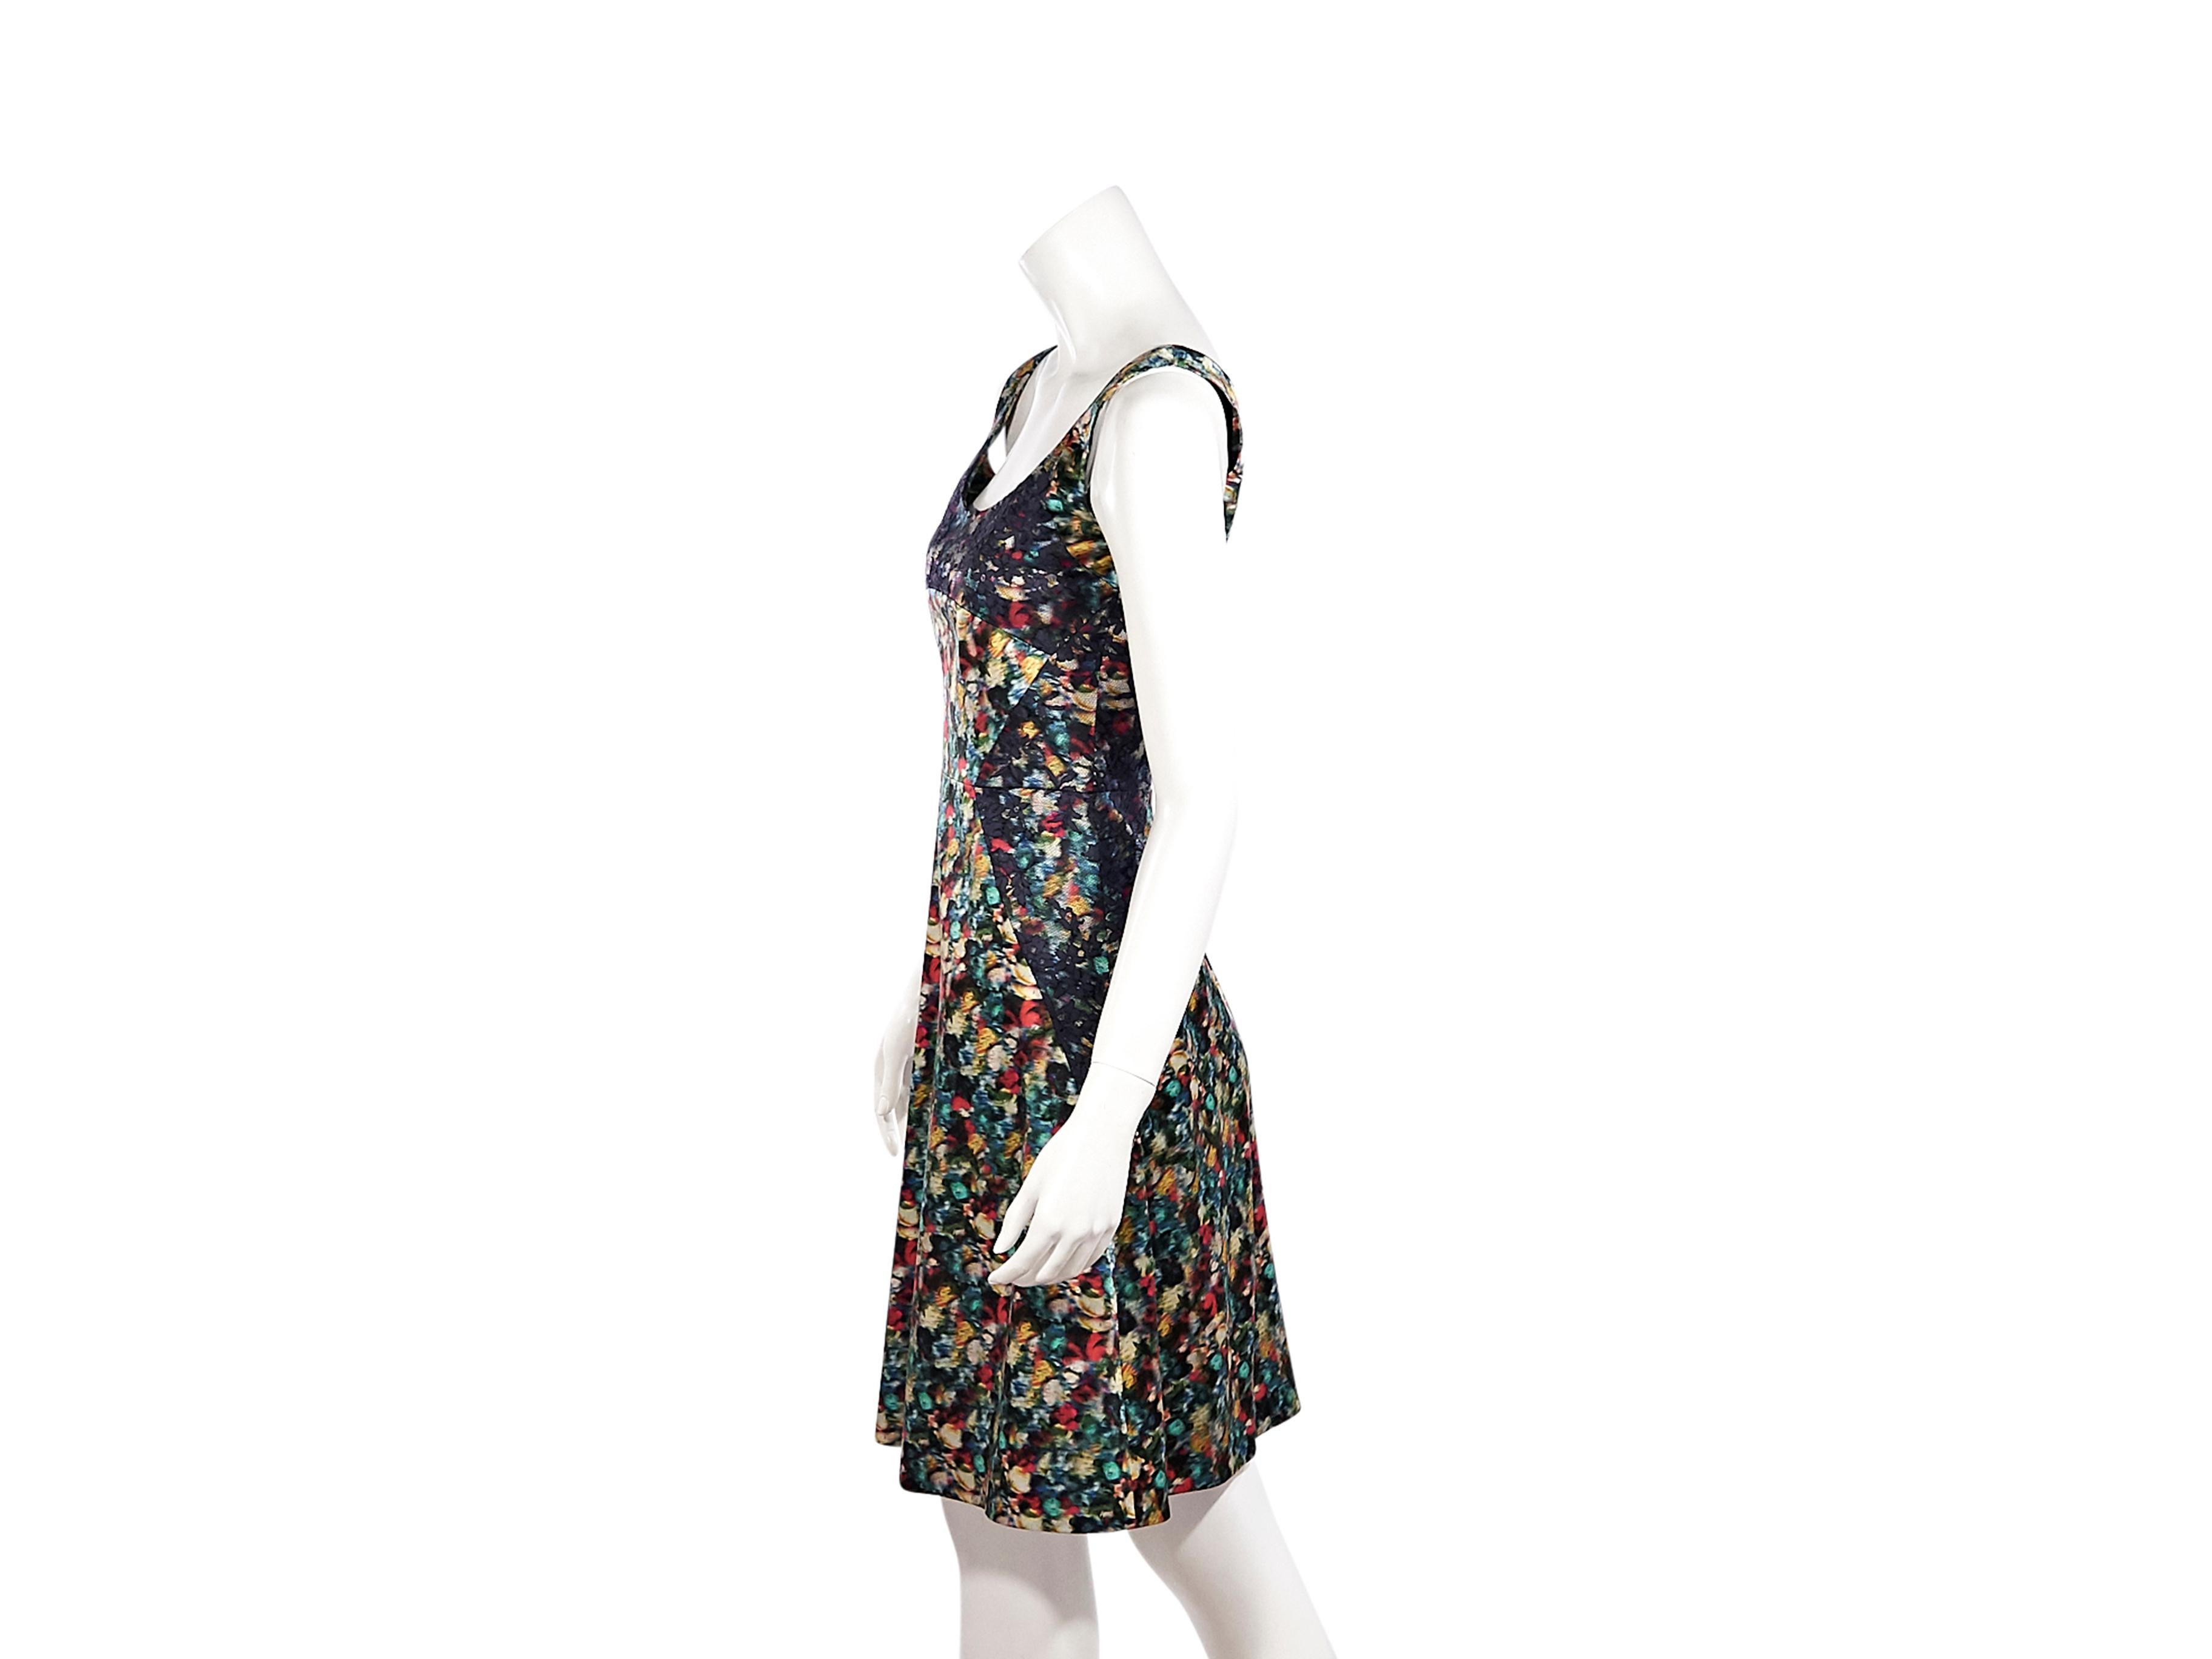 Product details:  Multicolor printed silk fit-and-flare dress by Erdem.  Trimmed with lace.  Scoopneck.  Sleeveless.  Concealed back zip closure.  34